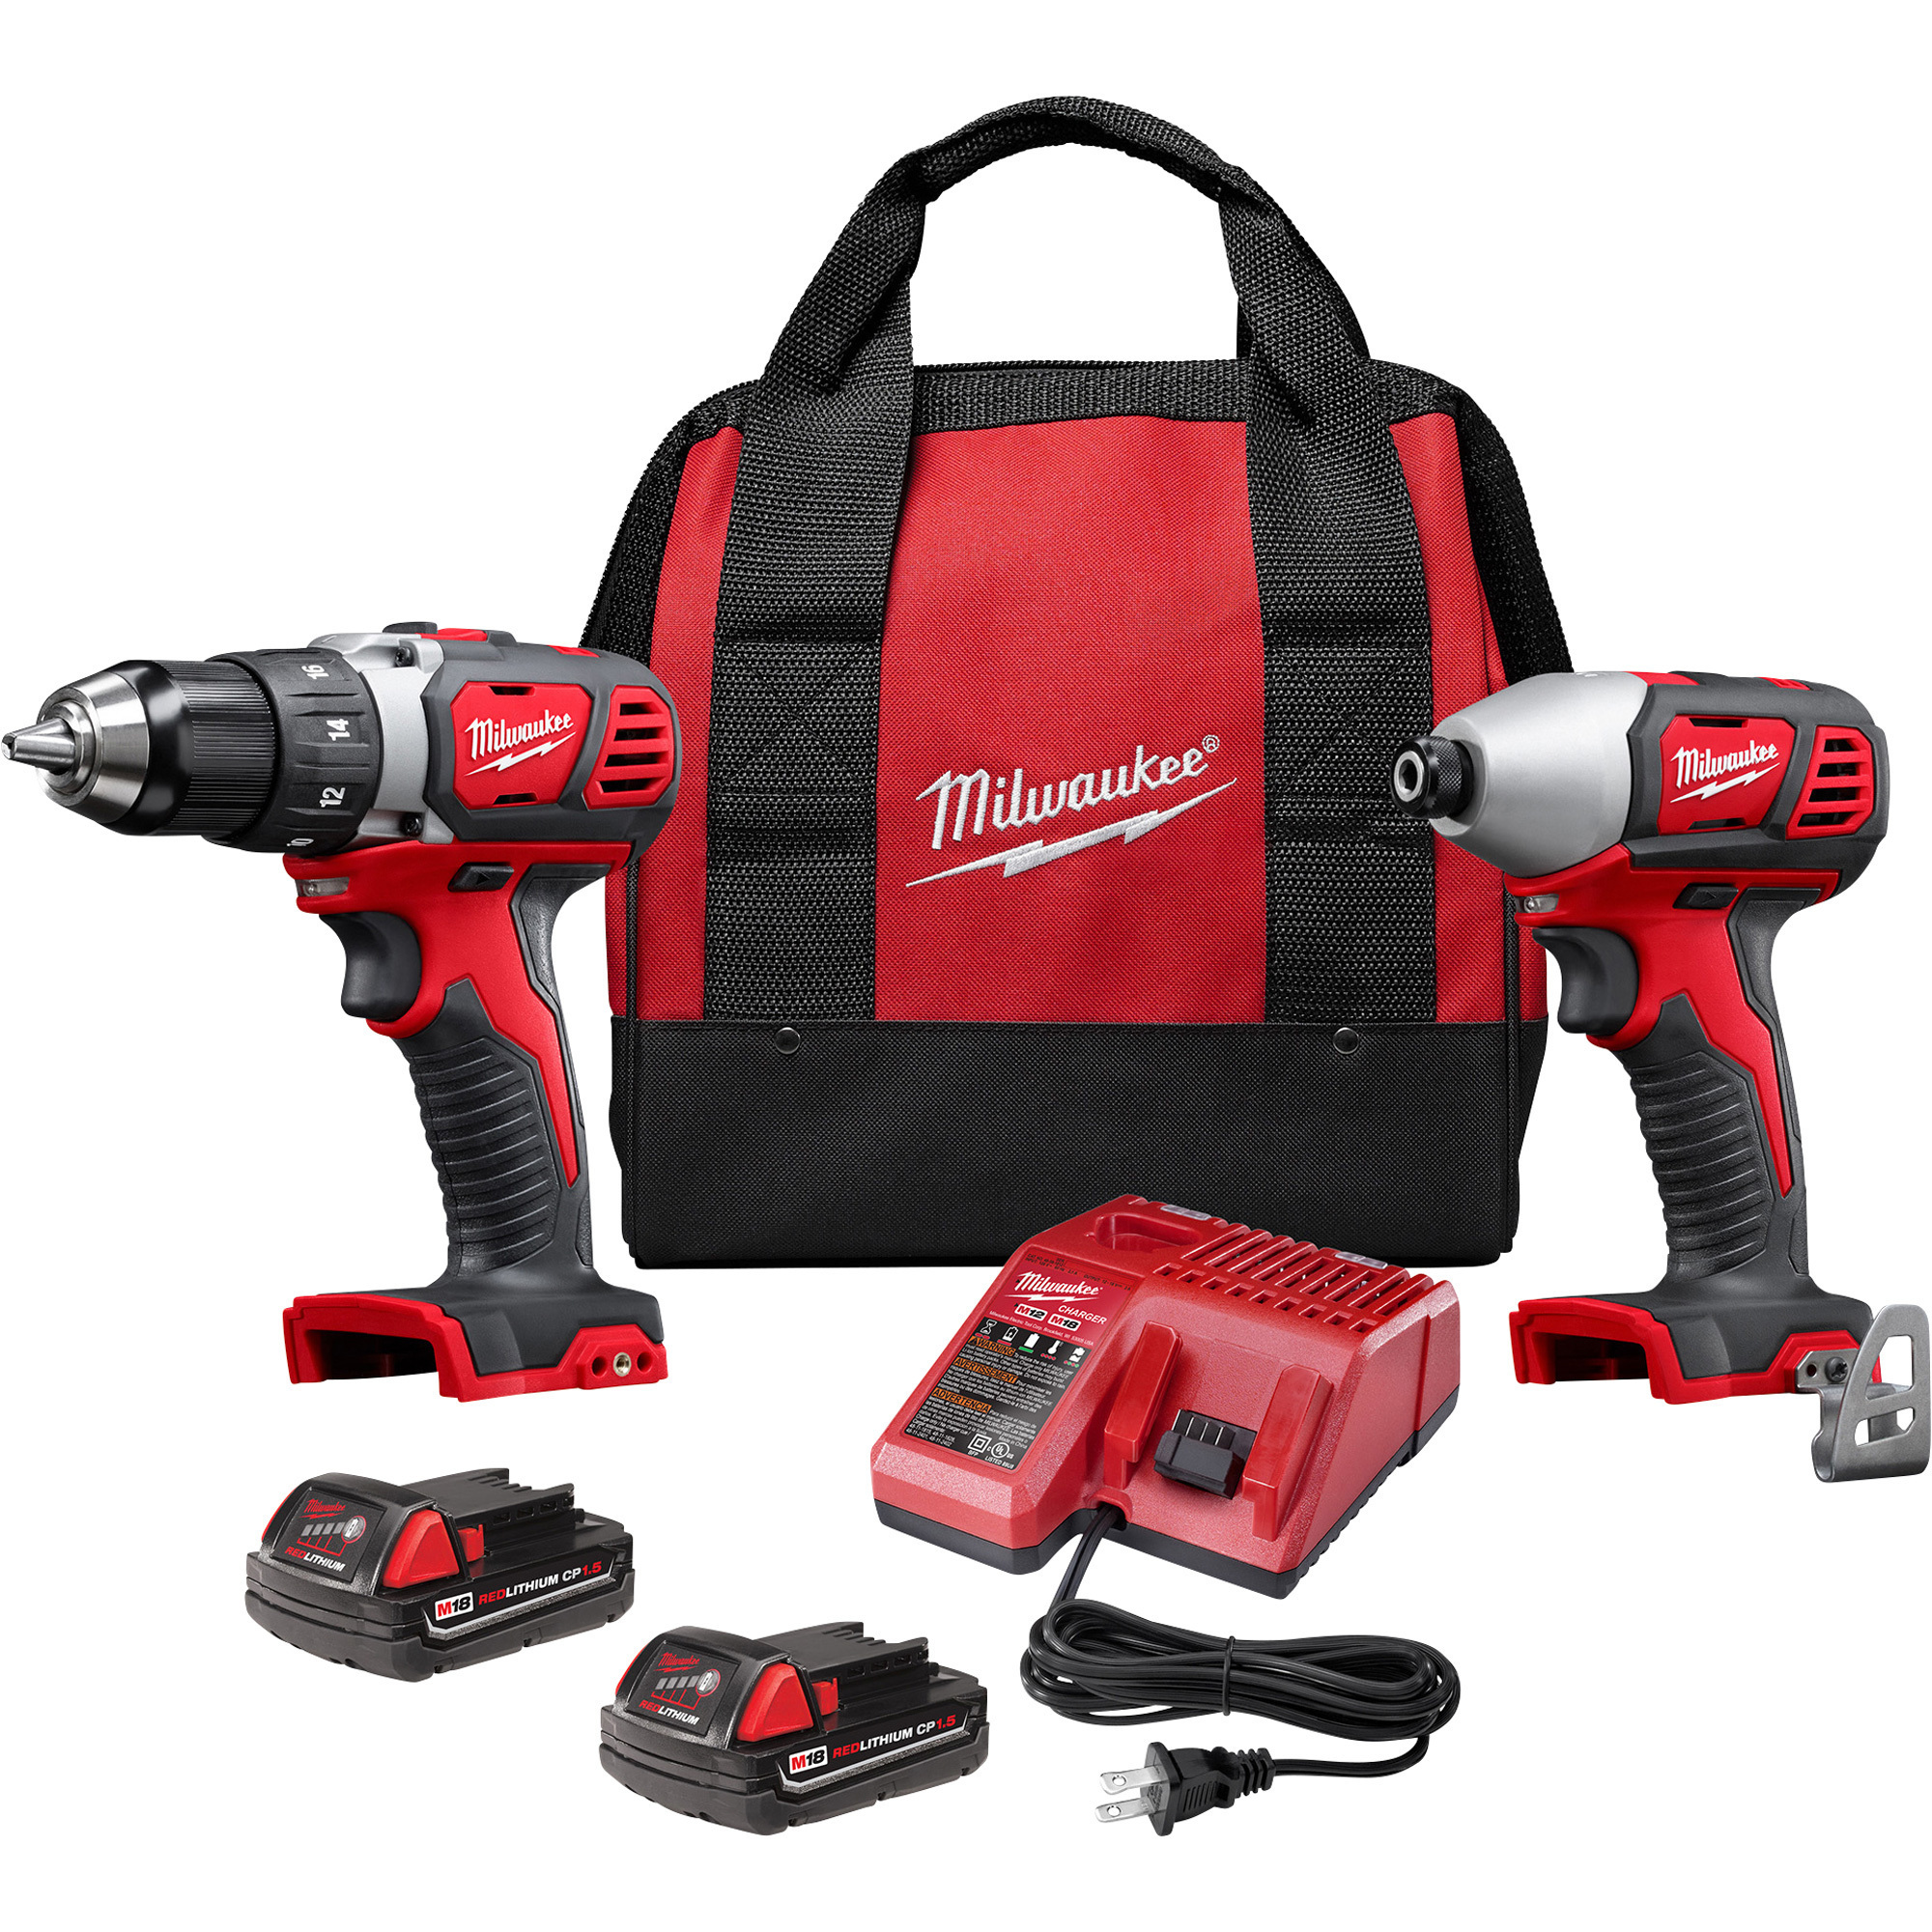 Milwaukee M18 Li-Ion Compact Cordless Power Tool Set — 1/2in. Drill/Driver   1/4in. Hex Impact Driver, Batteries, Model# 2691-22 Northern Tool